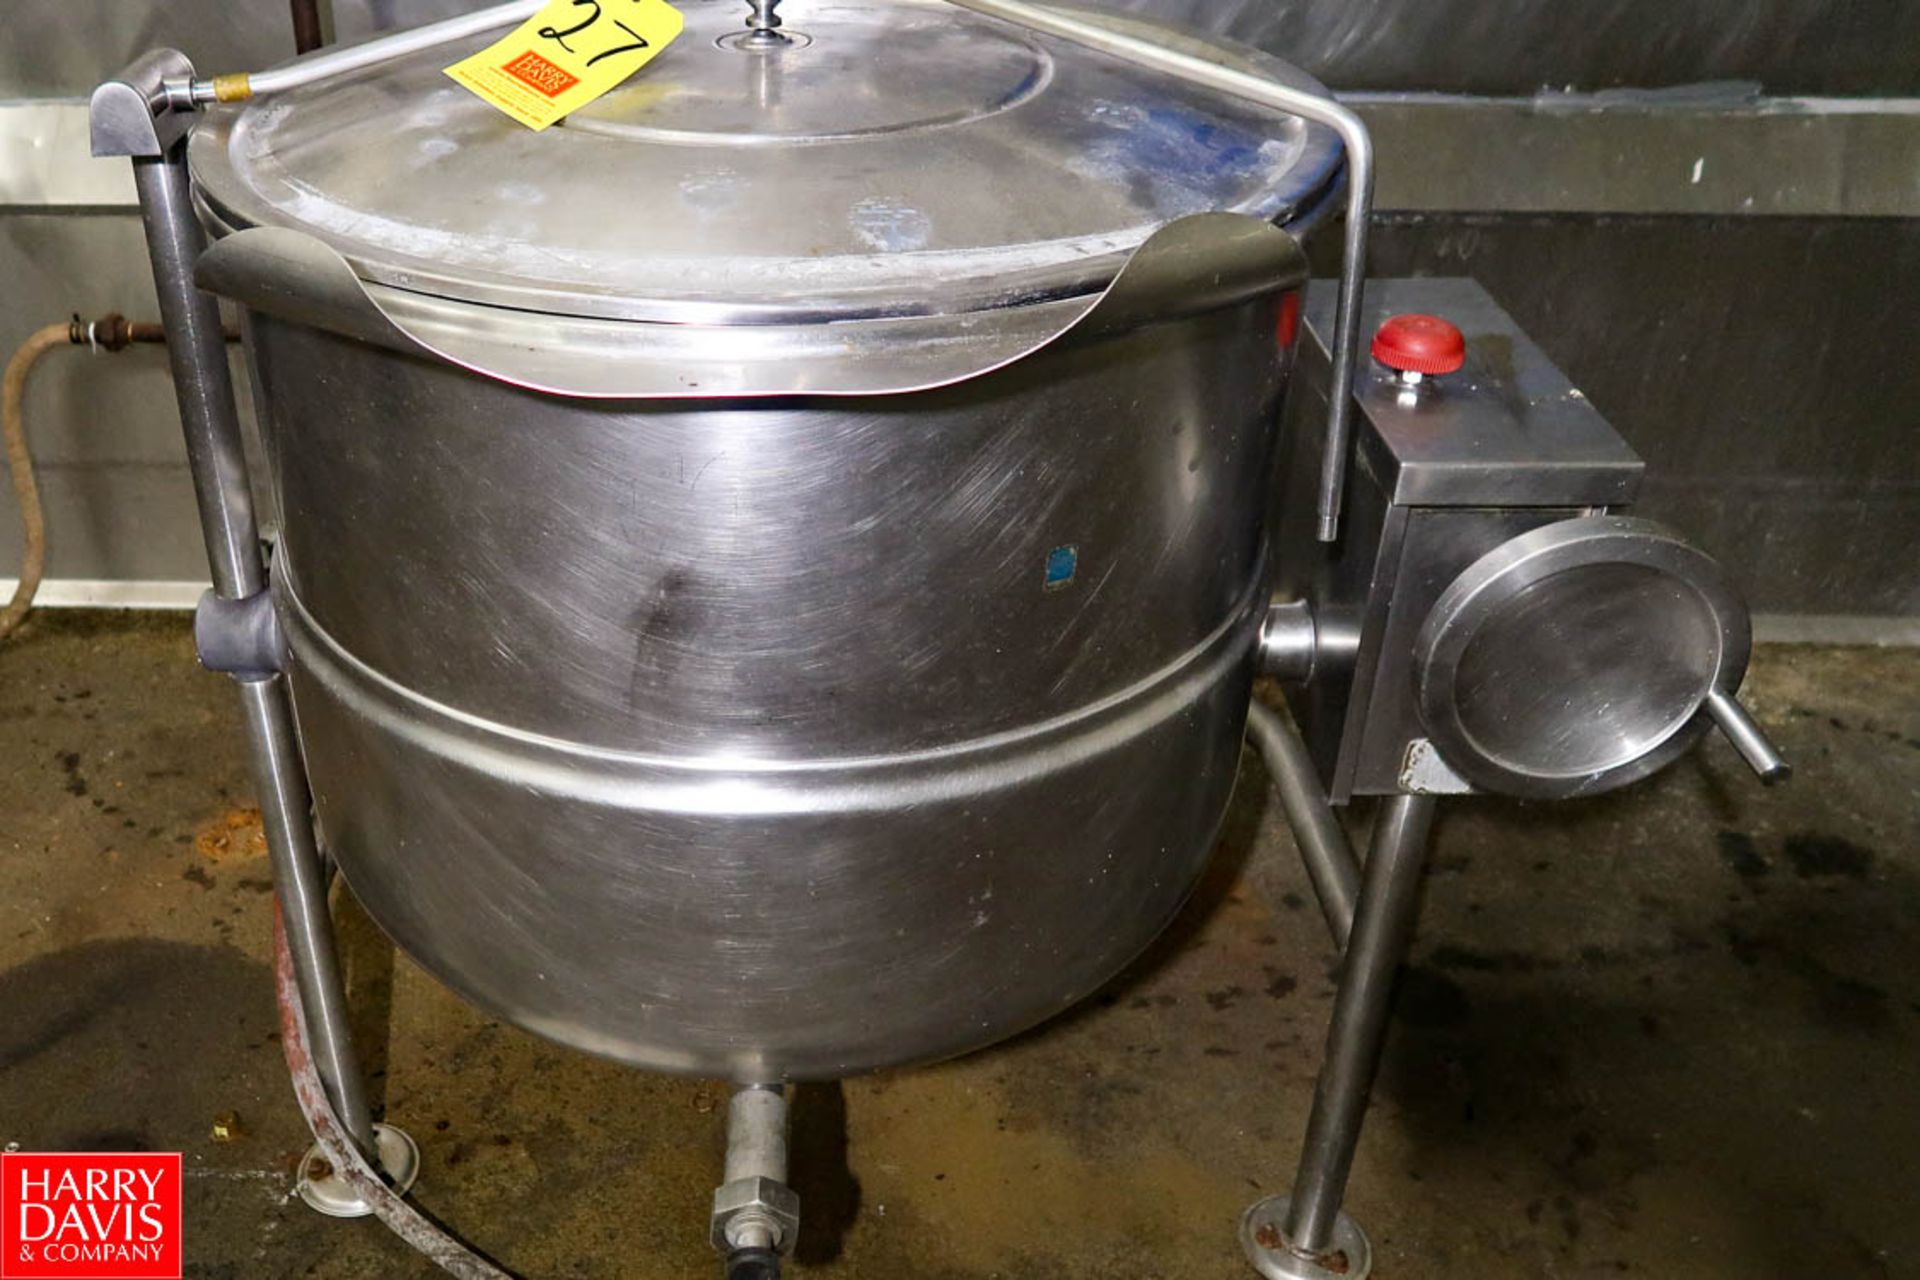 Cleveland 60 Gallon S/S Jacketed Tilting Kettle. Rigging Fee: $ 40.00